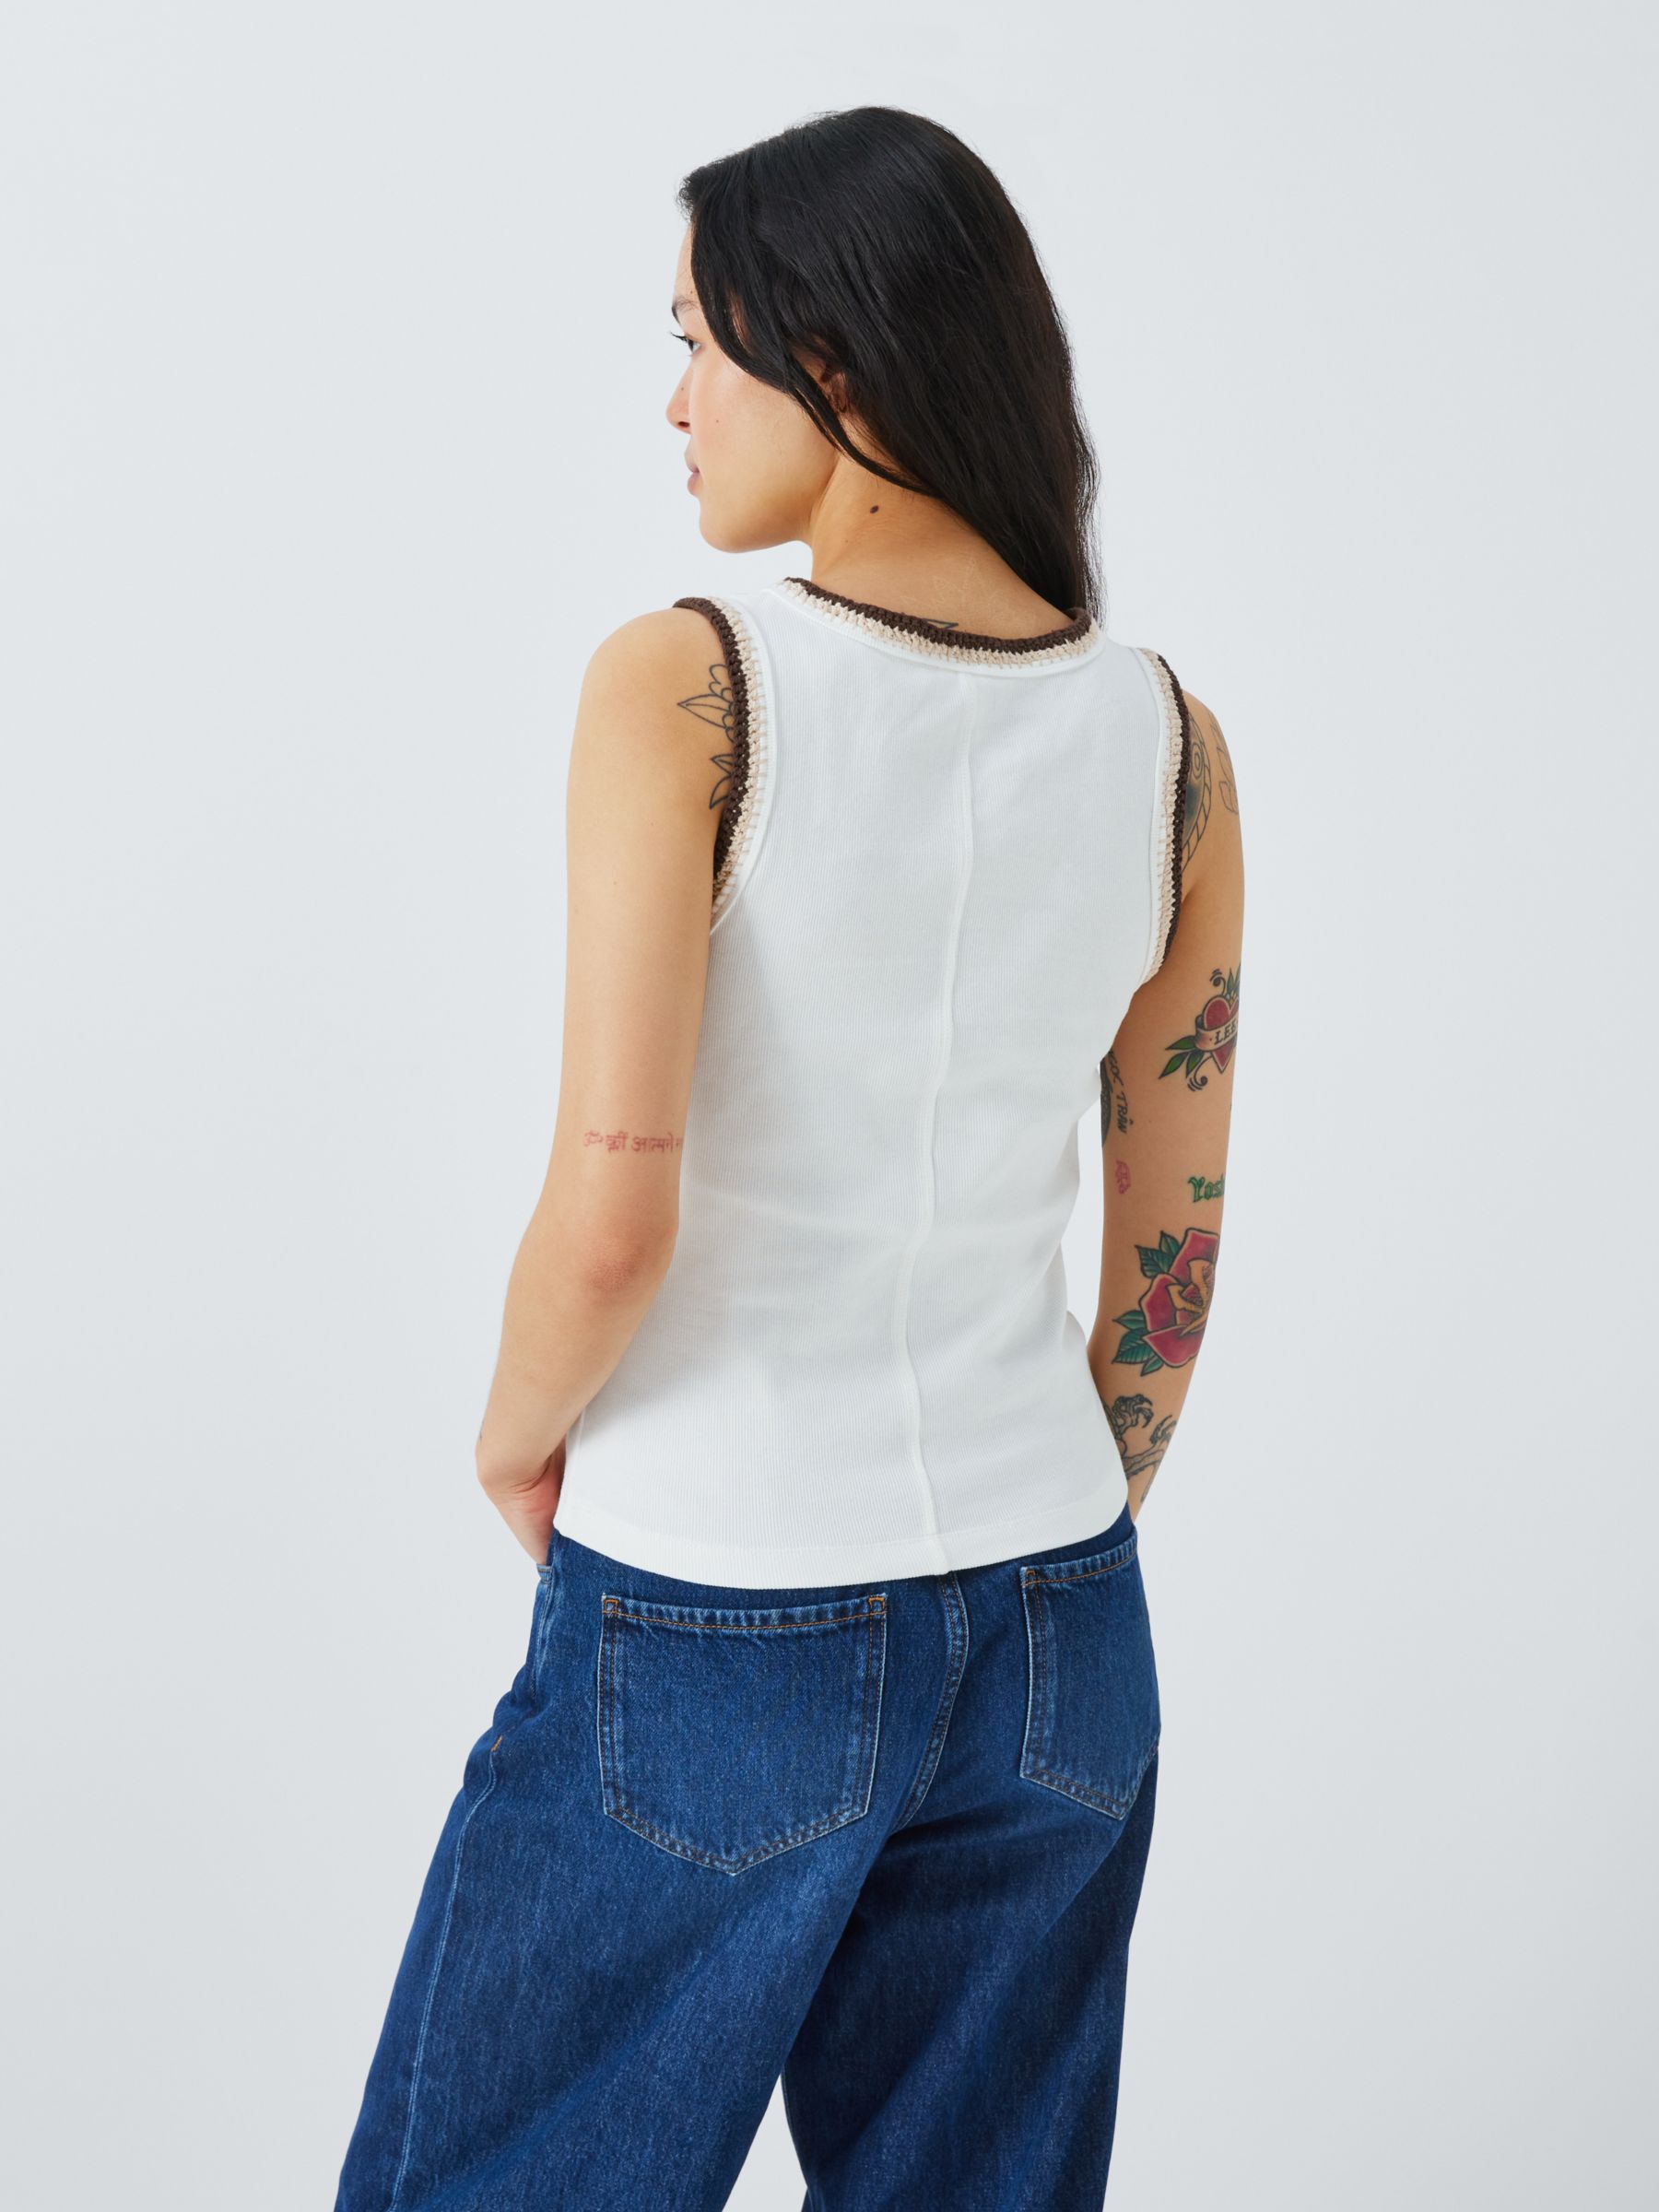 AND/OR Dari Embroidered Vest Top, White, 6